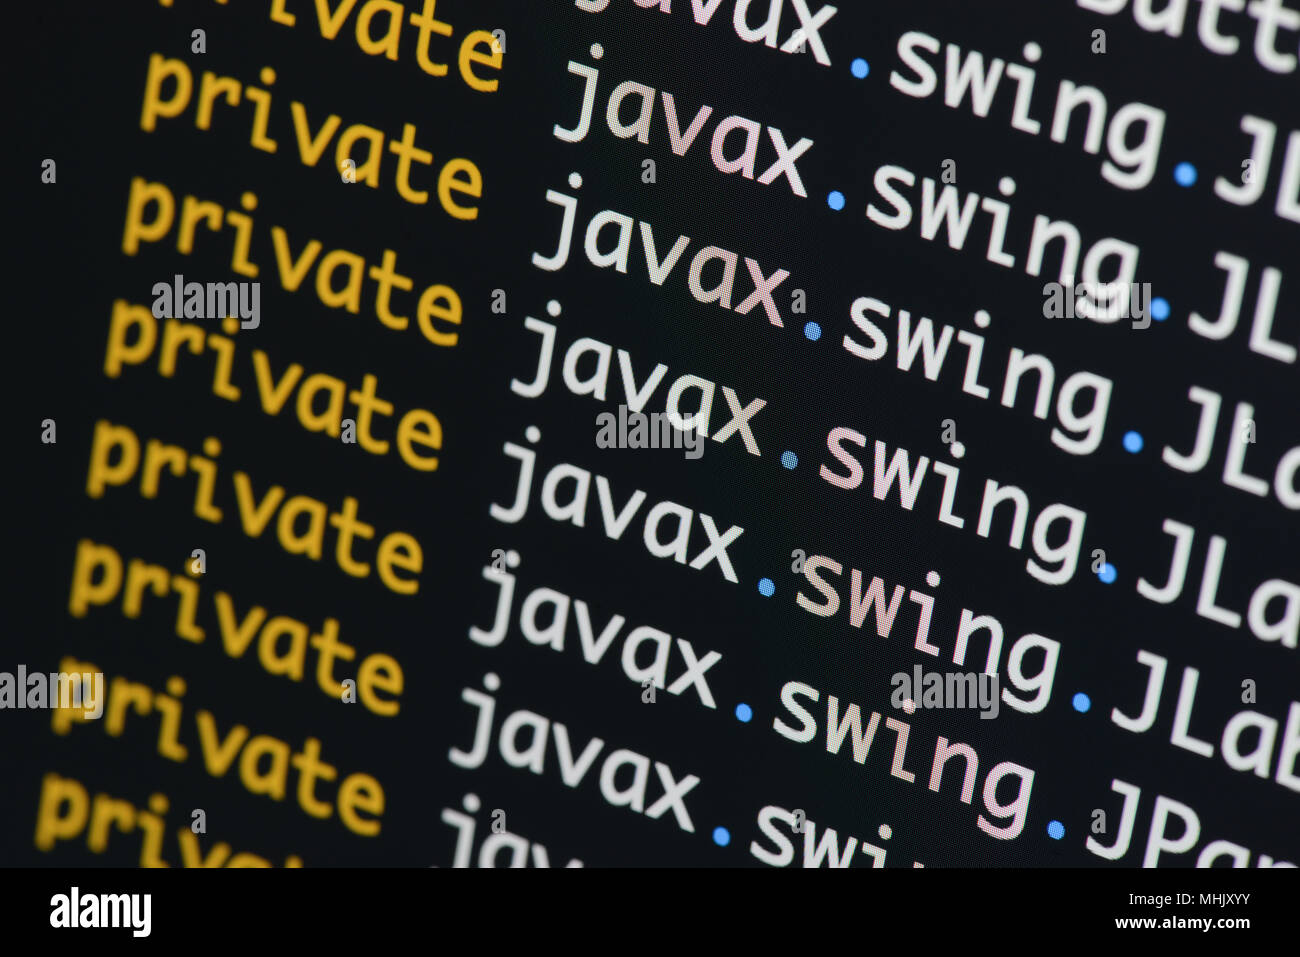 Real Java code developing screen. Programing workflow abstract algorithm concept. Lines of Java code visible . Stock Photo